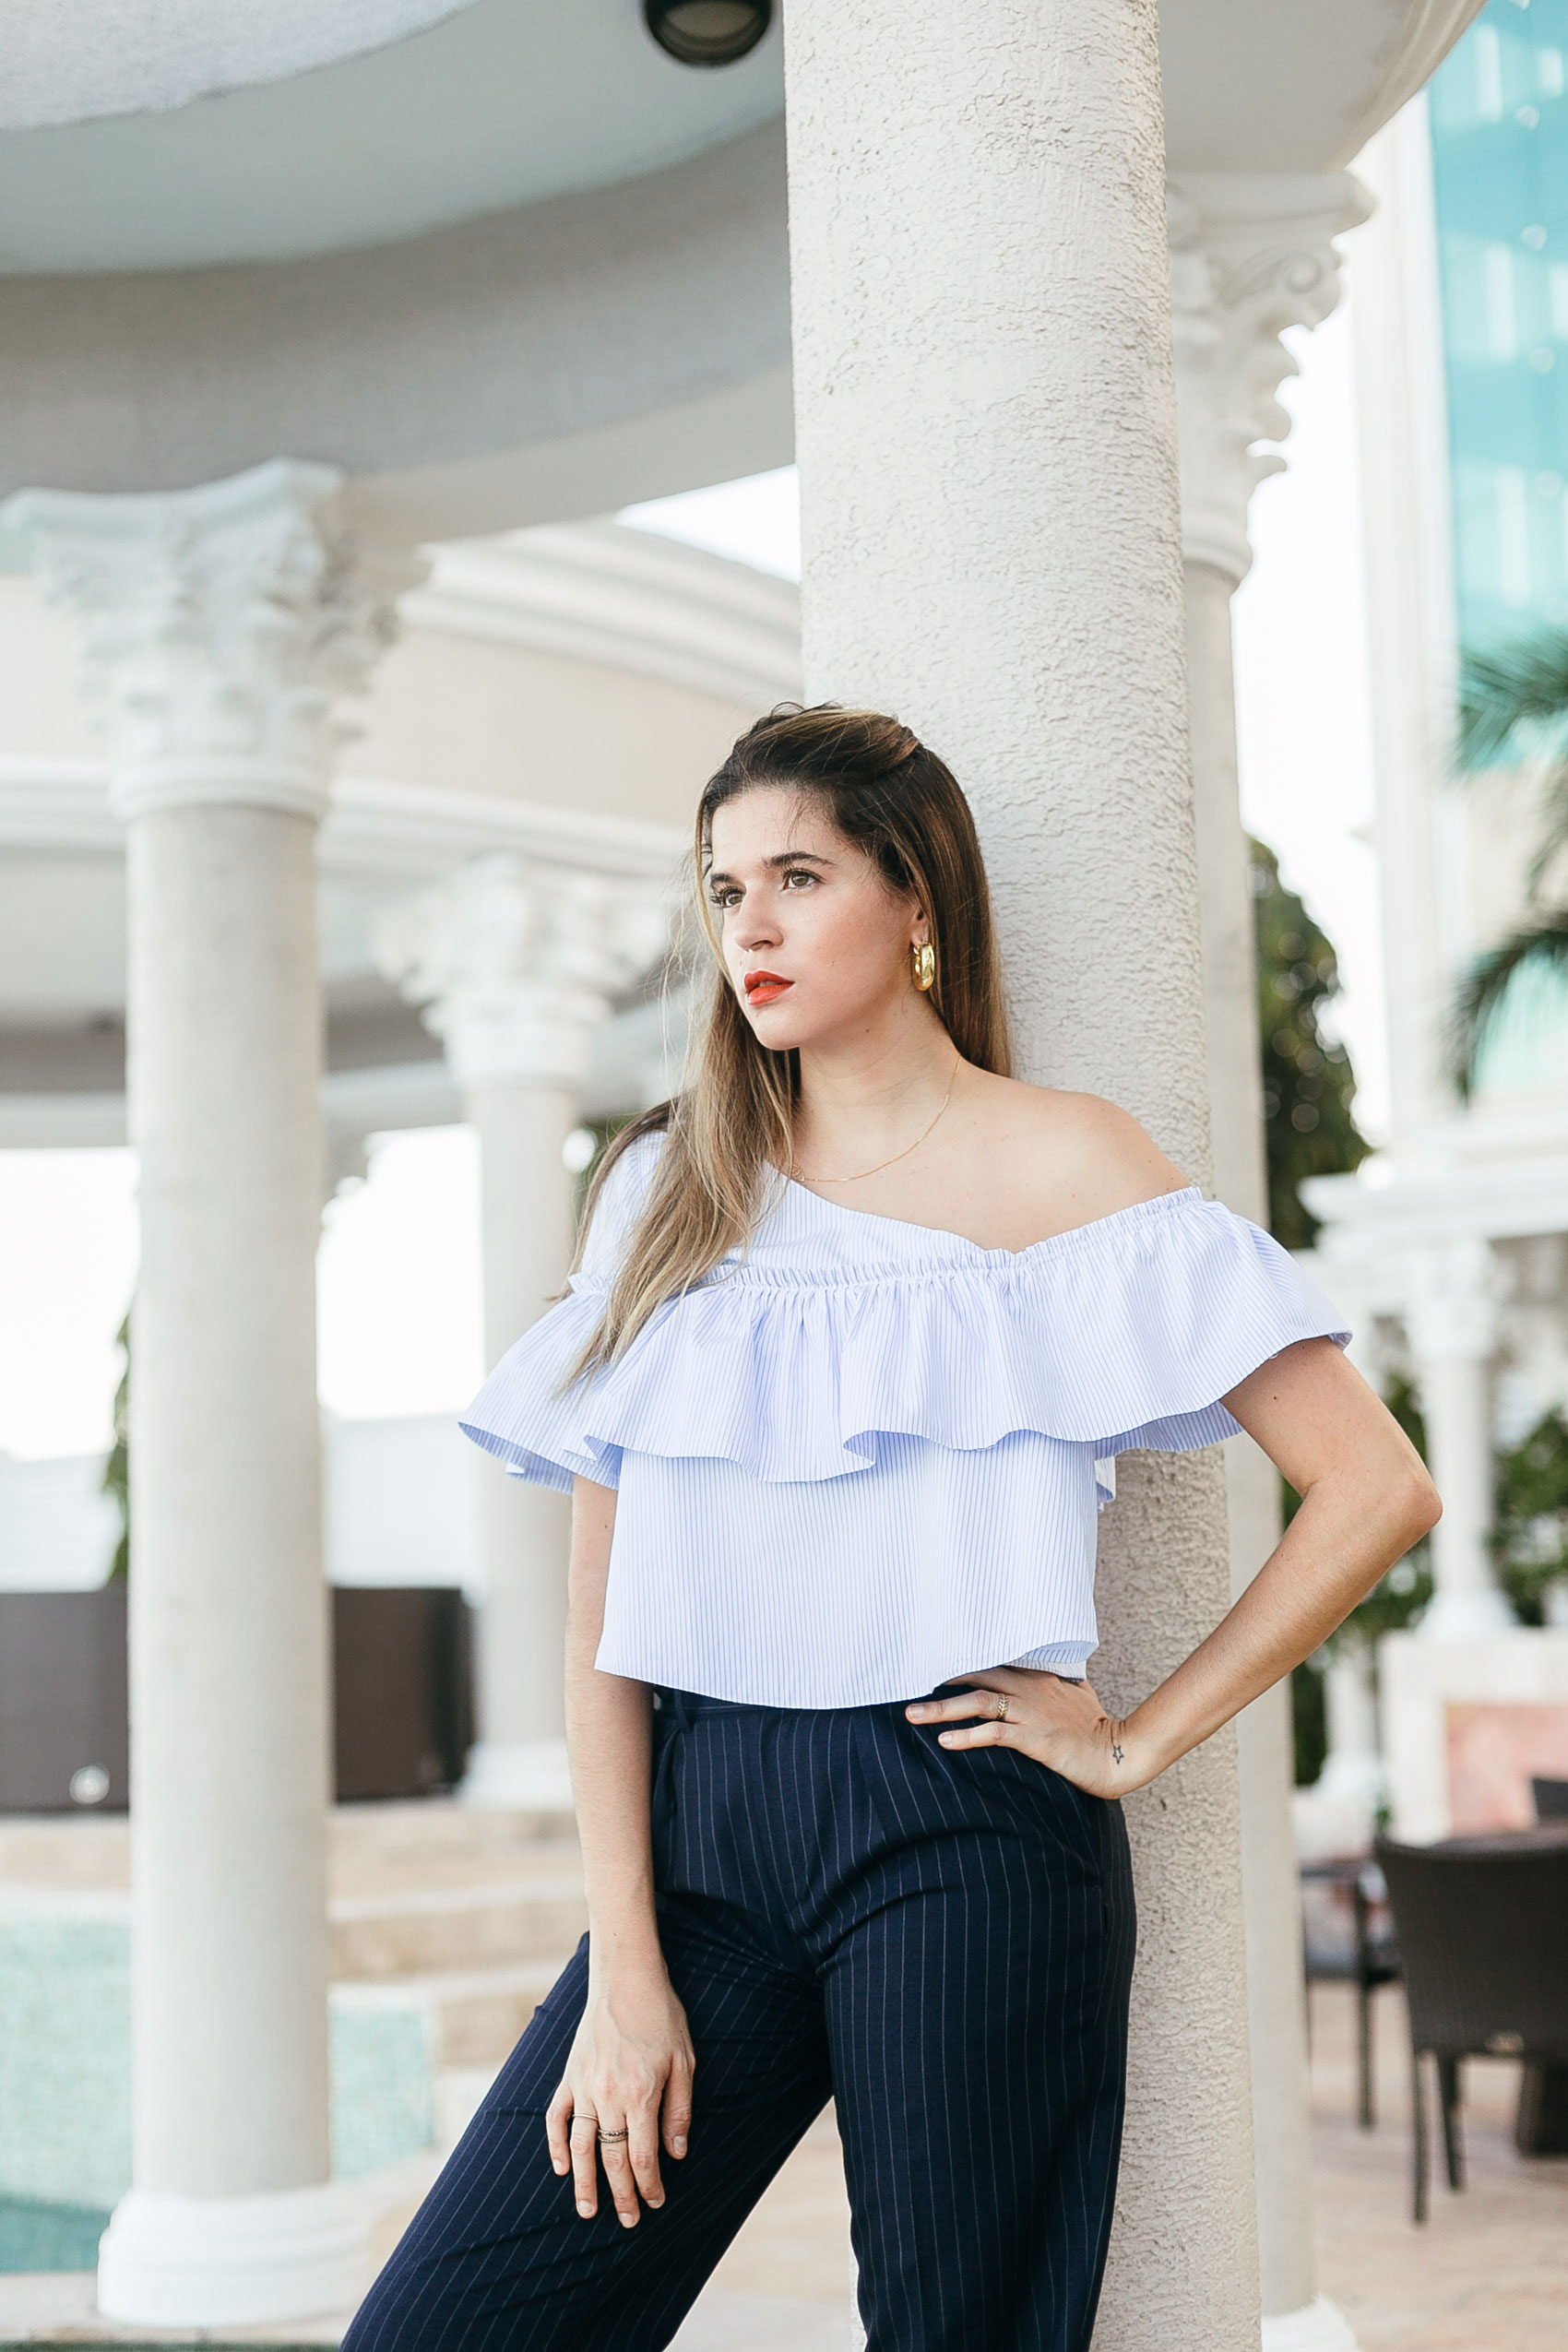 Maristella wearing a striped ruffled one shoulder blouse from Zara, navy blue pinstripe trousers from Polo Ralph Lauren, red lipstick from Nars and vintage thick gold hoop earrings